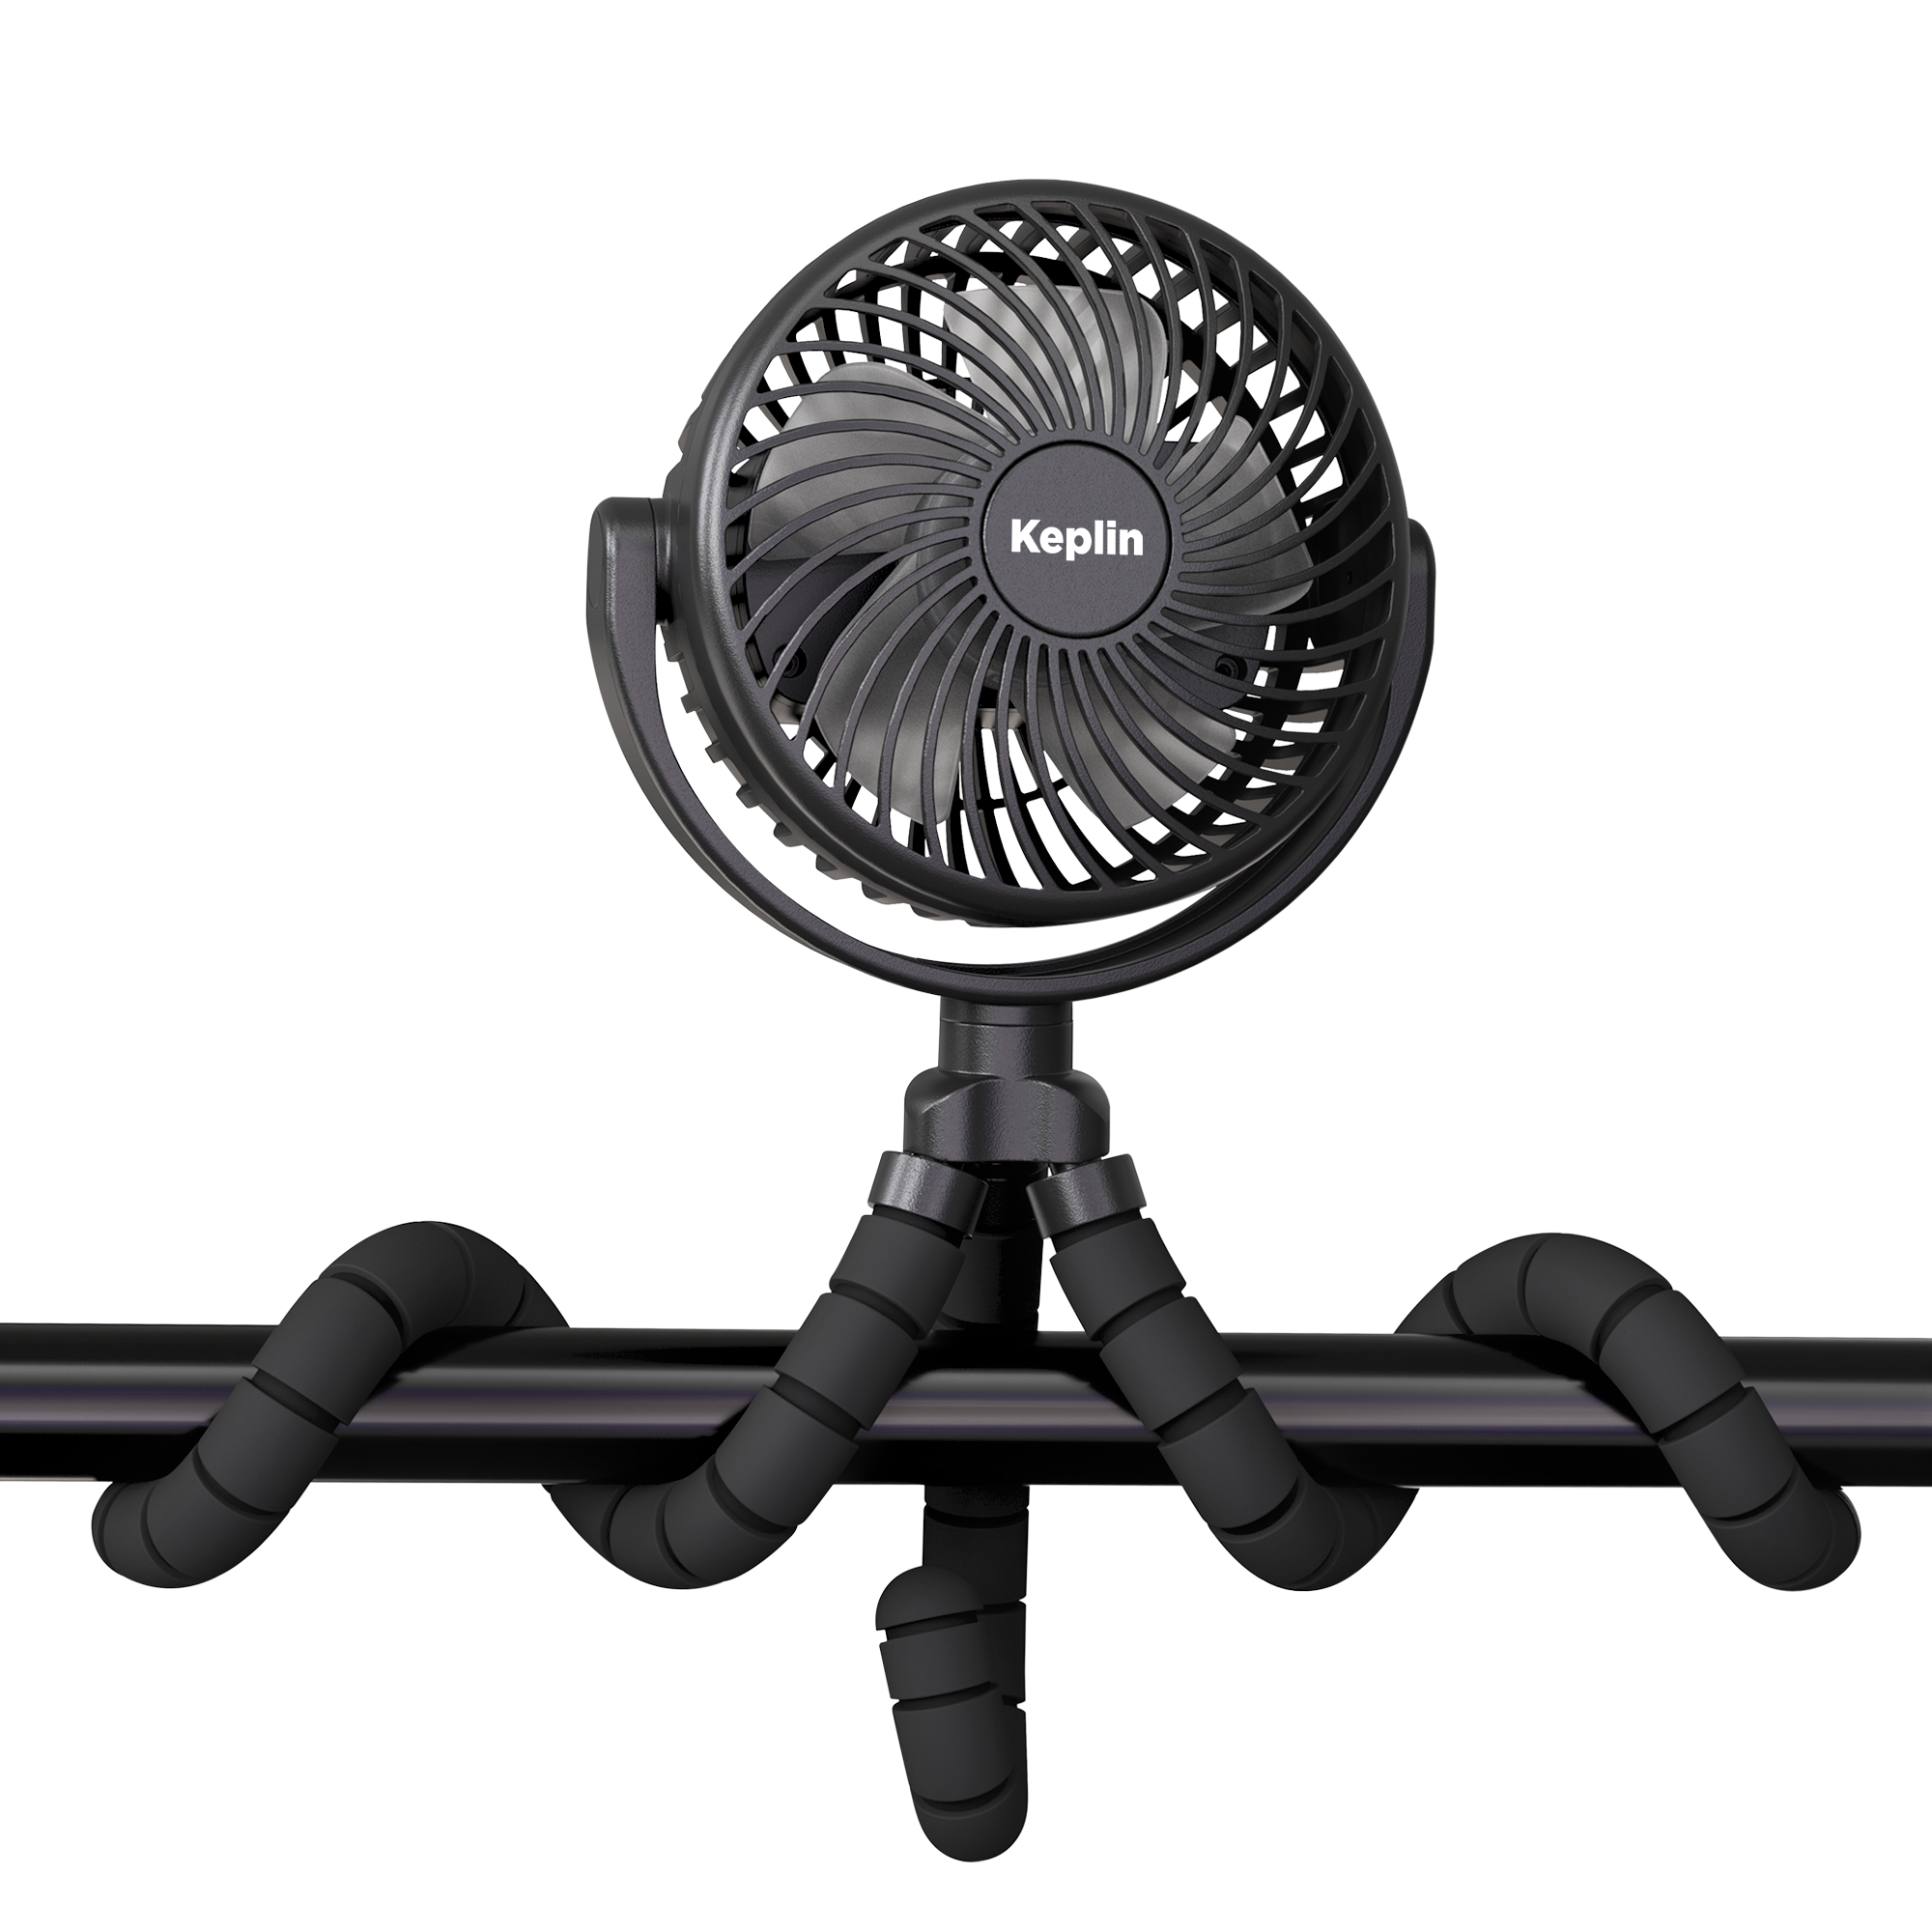 Portable Handheld Fan with Flexible Handle - Rechargeable, 3 Speed Settings, Lightweight and Quiet